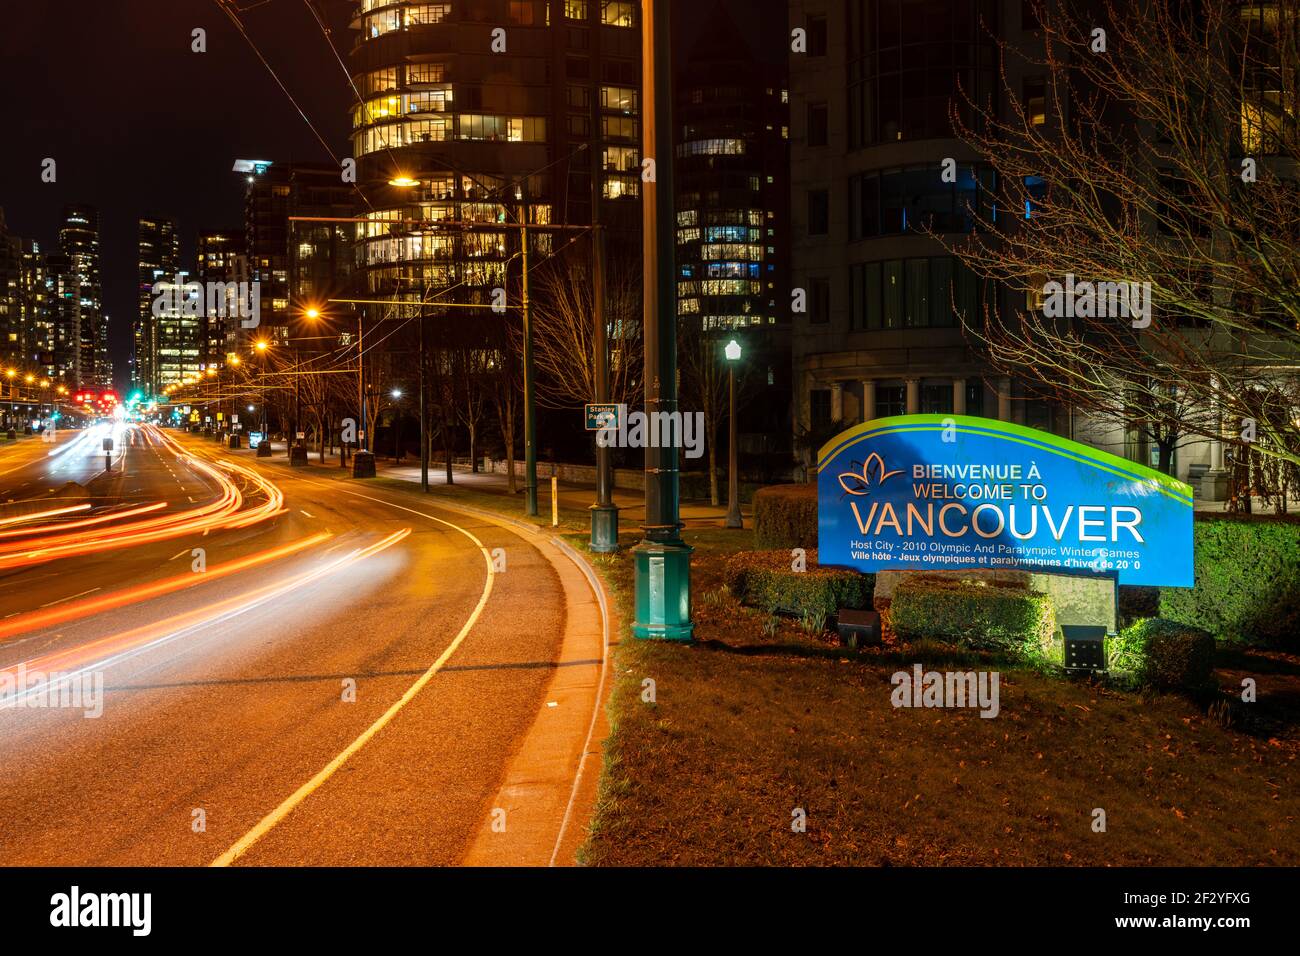 Welcome to Vancouver winter games sign board with downtown night street view. British Columbia, Canada. Stock Photo